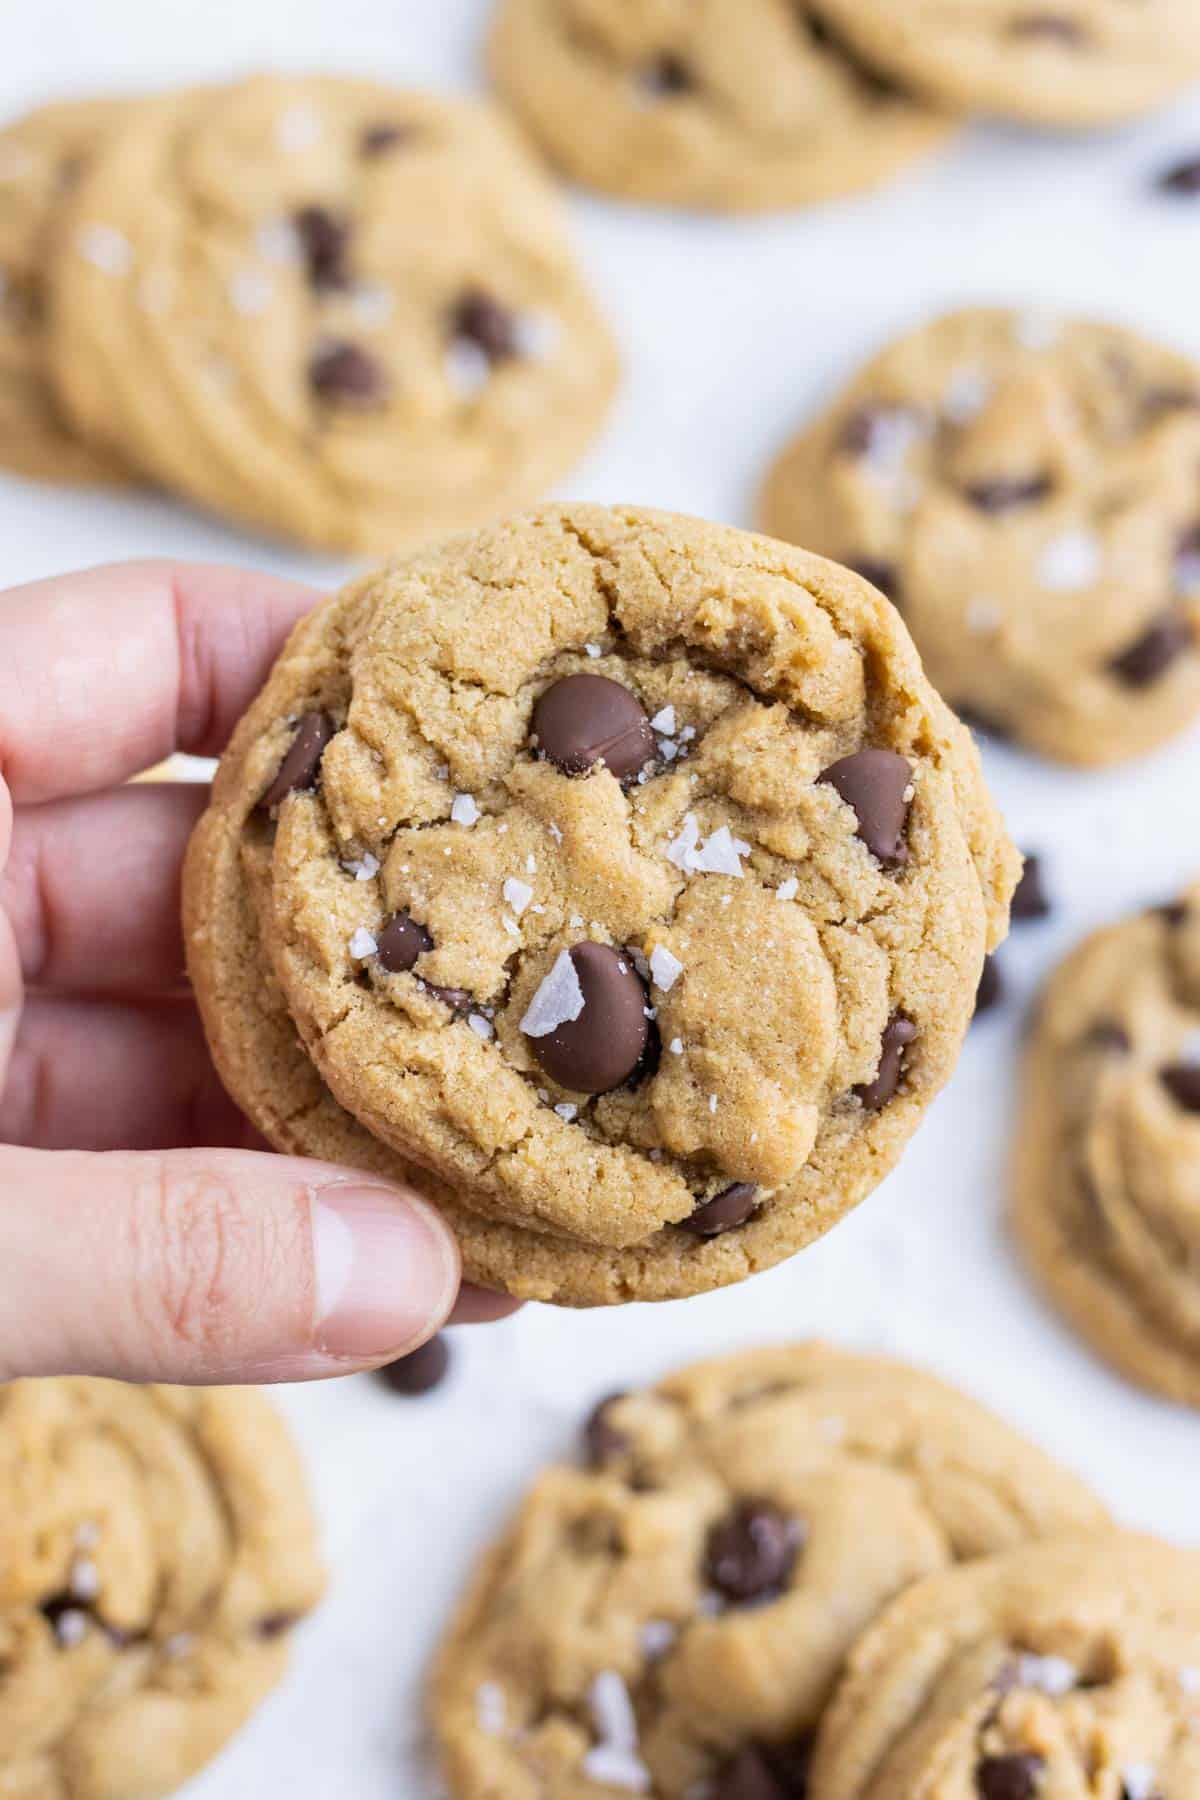 A close up shot of a peanut butter chocolate chip cookie.